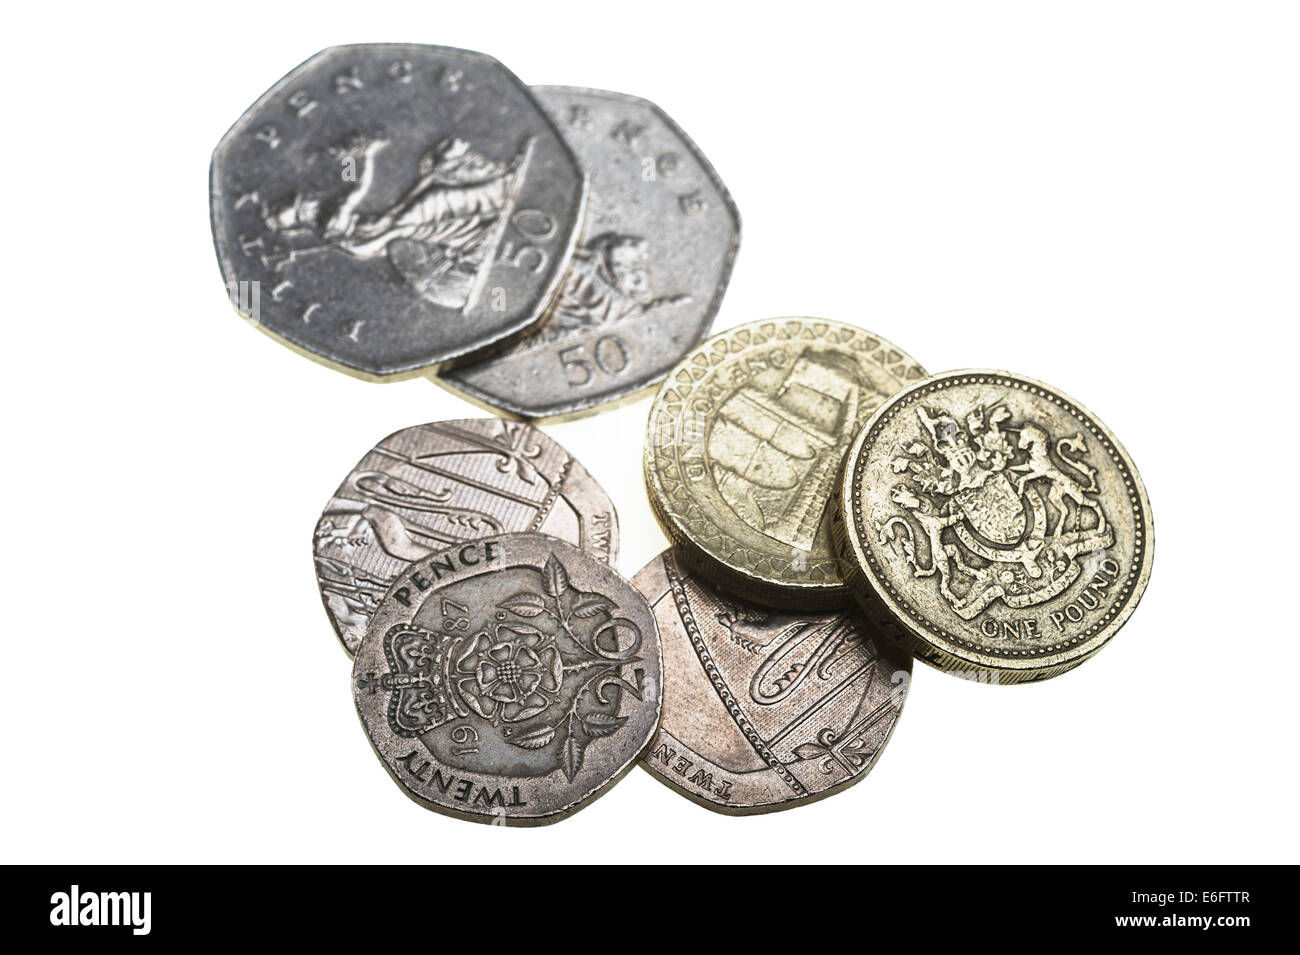 Small group of UK sterling coins. Cut out on white. Stock Photo